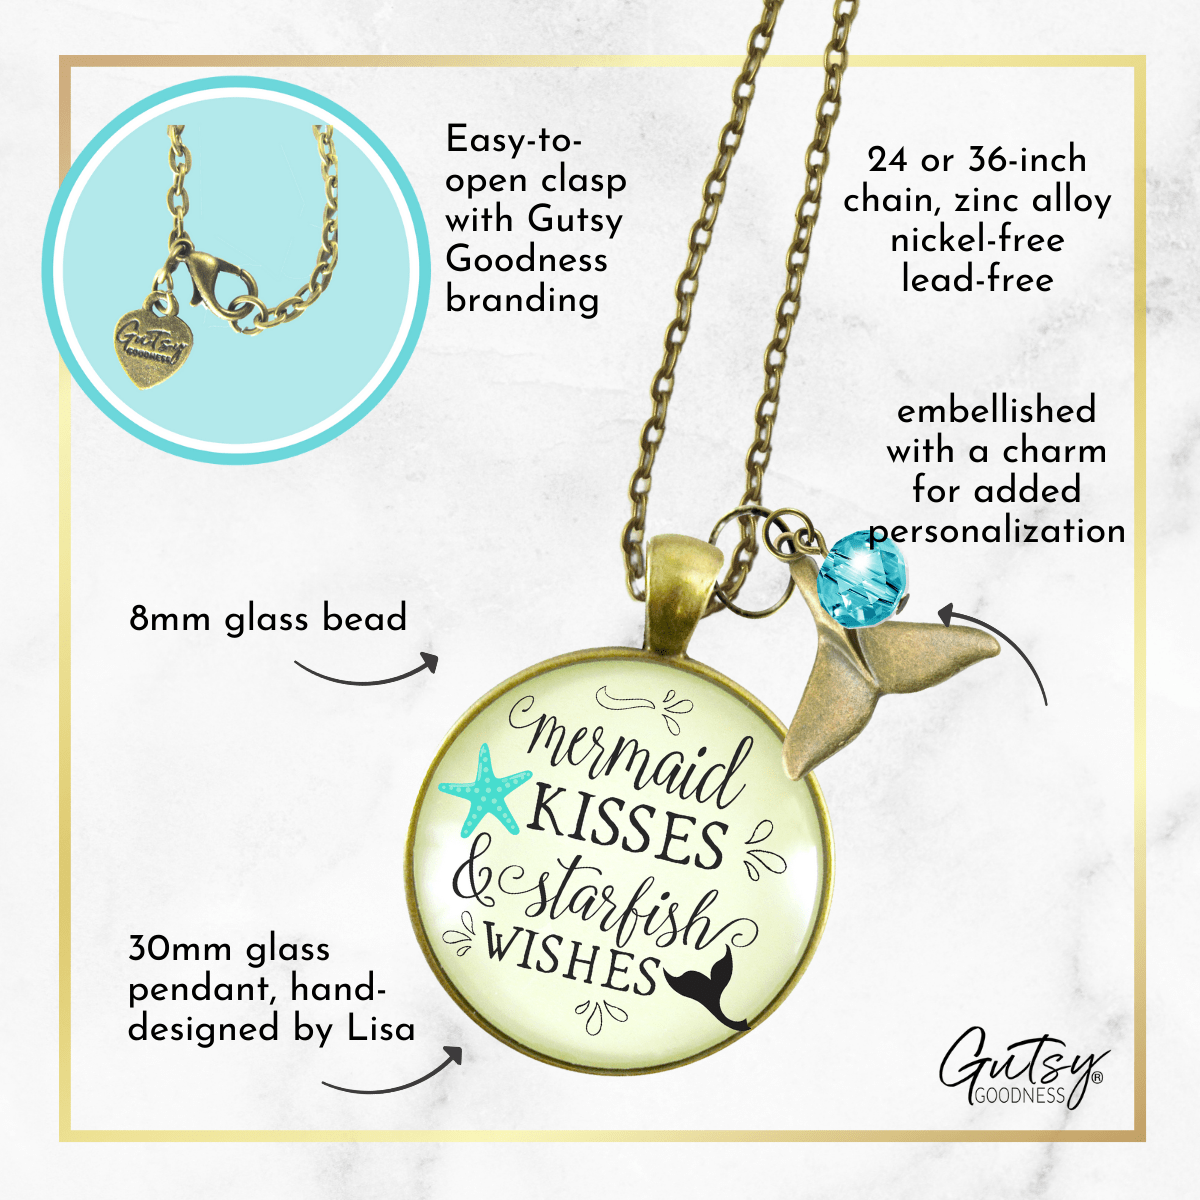 Gutsy Goodness Mermaid Tail Necklace Kisses Starfish Wishes Beach BFF Nautical Sea Gift Jewelry - Gutsy Goodness Handmade Jewelry;Mermaid Tail Necklace Kisses Starfish Wishes Beach Bff Nautical Sea Gift Jewelry - Gutsy Goodness Handmade Jewelry Gifts